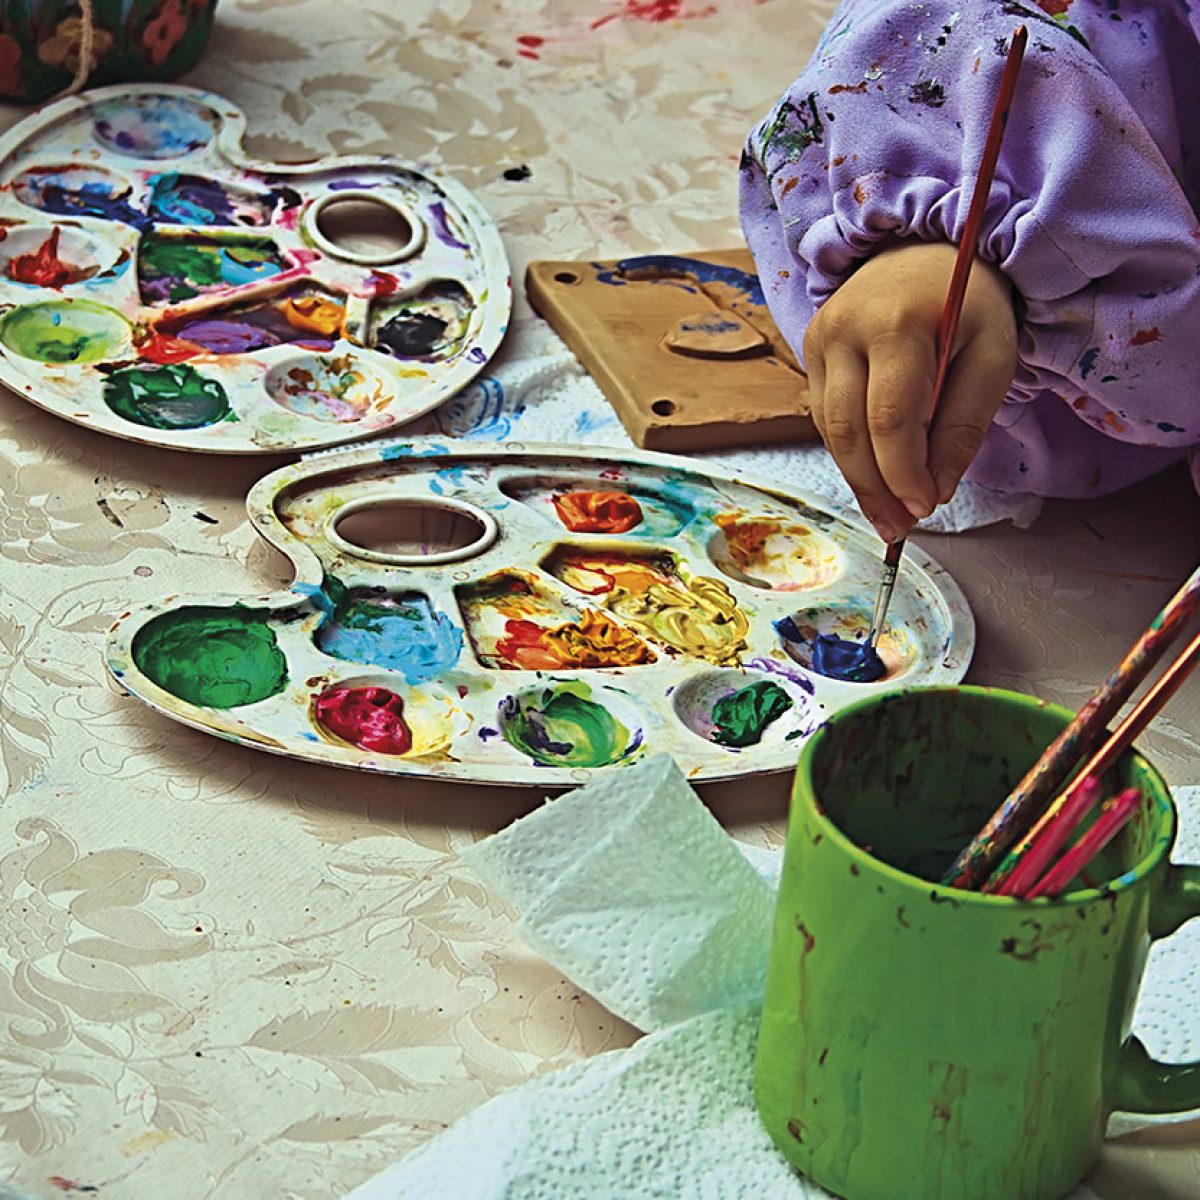 Children painting pottery at a workshop organized by the International Children's Day in Timisoara, Romania.